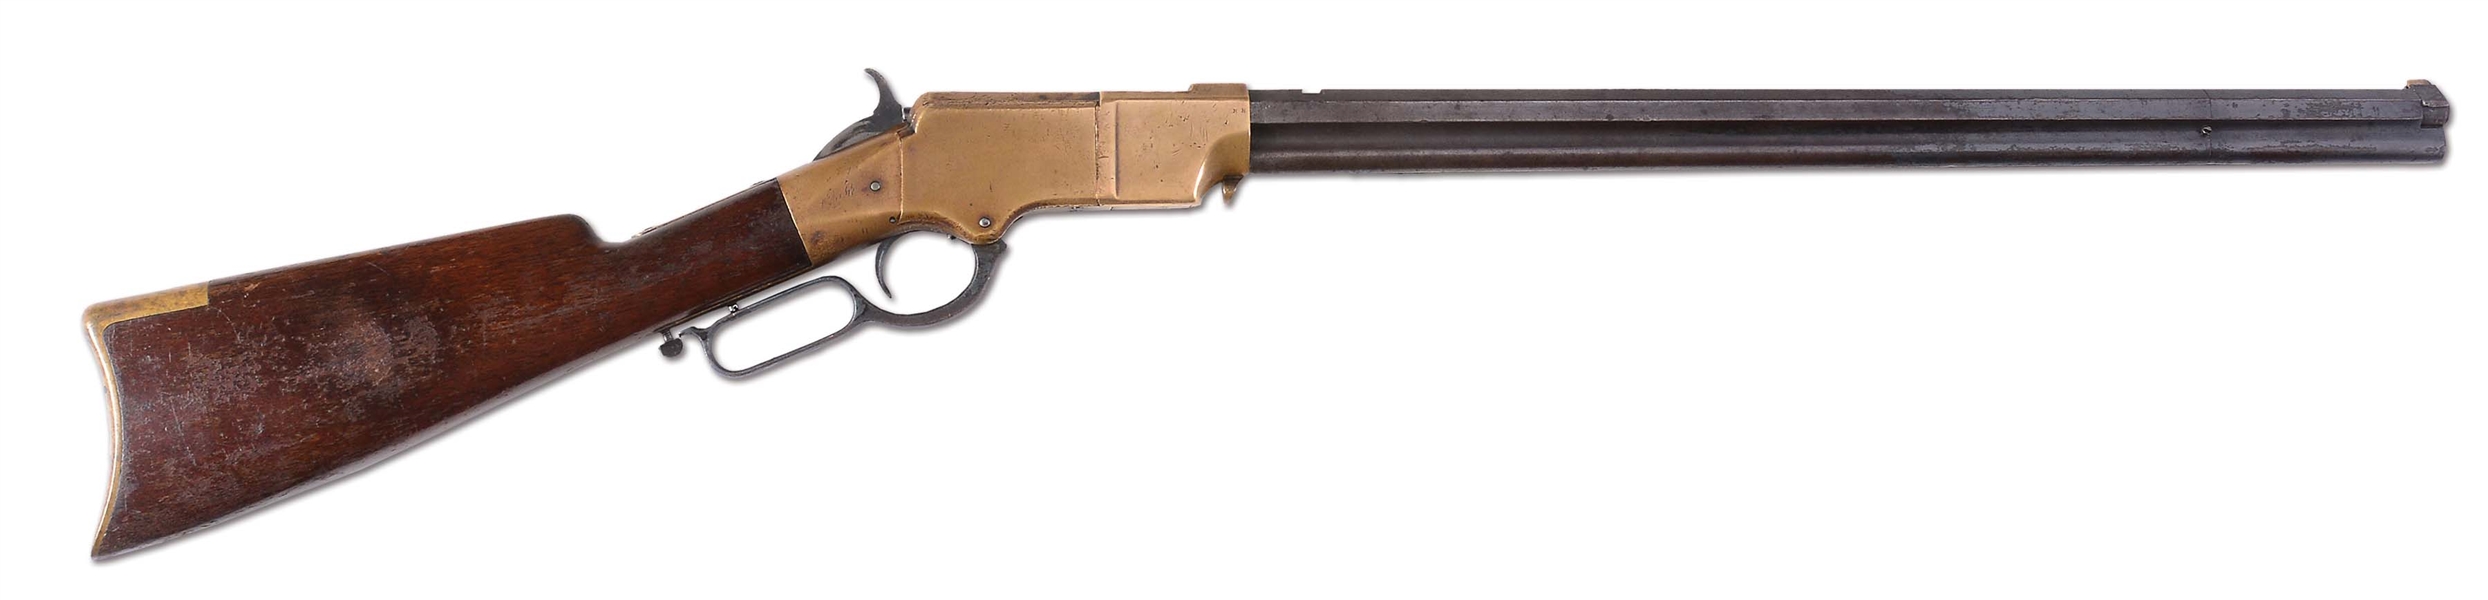 (A) WINCHESTER MARTIALLY MARKED MODEL 1860 HENRY LEVER ACTION RIFLE (1863).